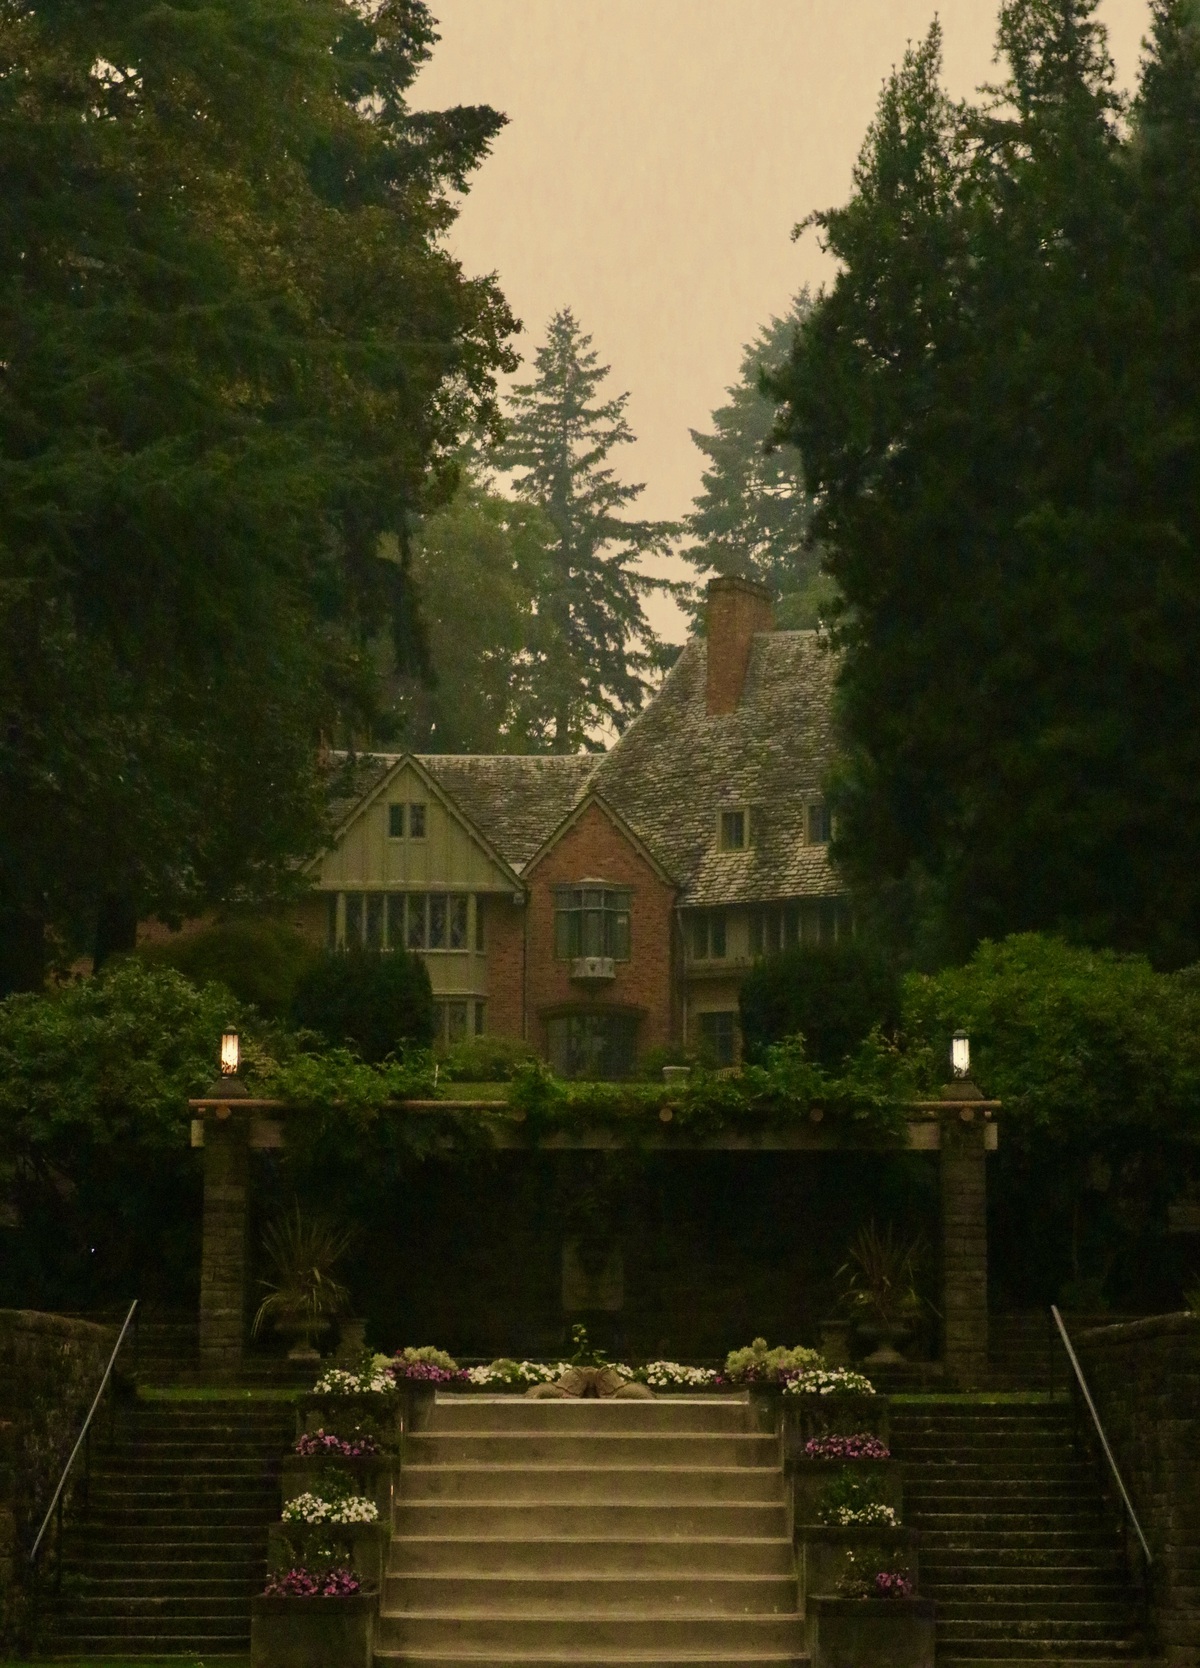 Photograph of Frank Manor House from the perspective of the Reflecting Pool in the foreground and a smoke-filled sky in the background.